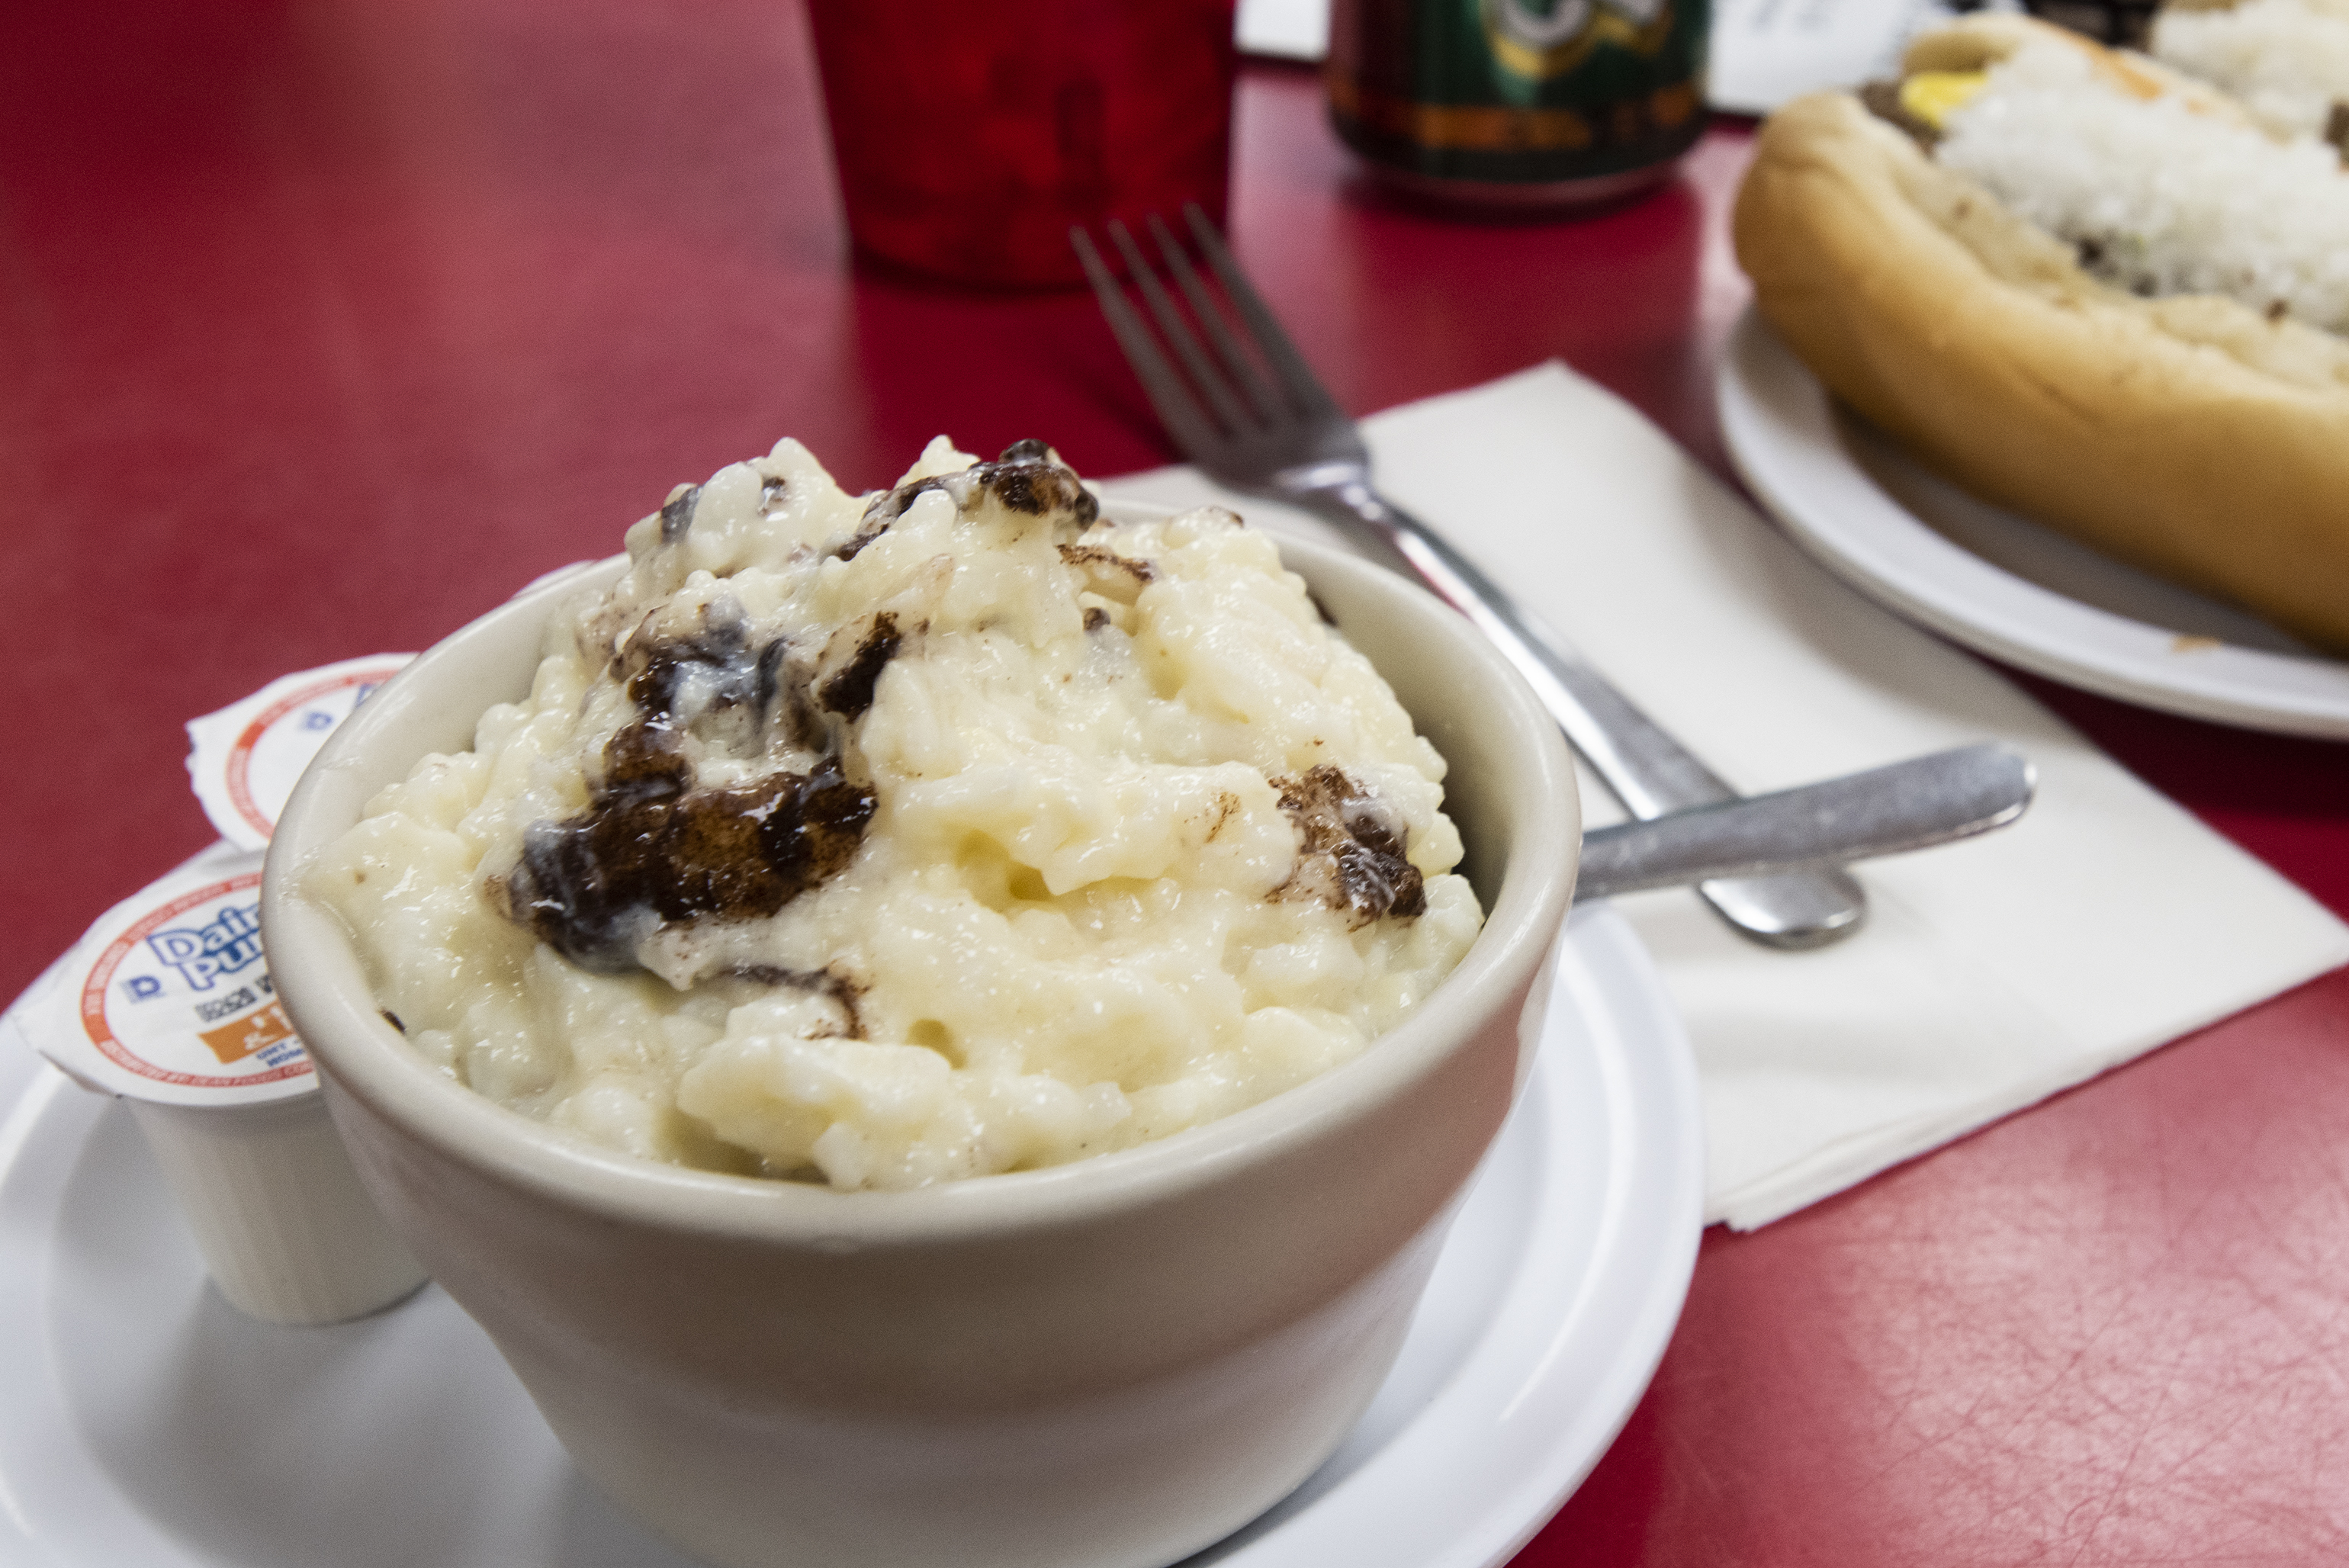 Rice pudding is served at Virginia Coney Island, 649 E. Michigan Ave., on Monday, July 6, 2020. The restaurant has been serving the Jackson community since 1914.